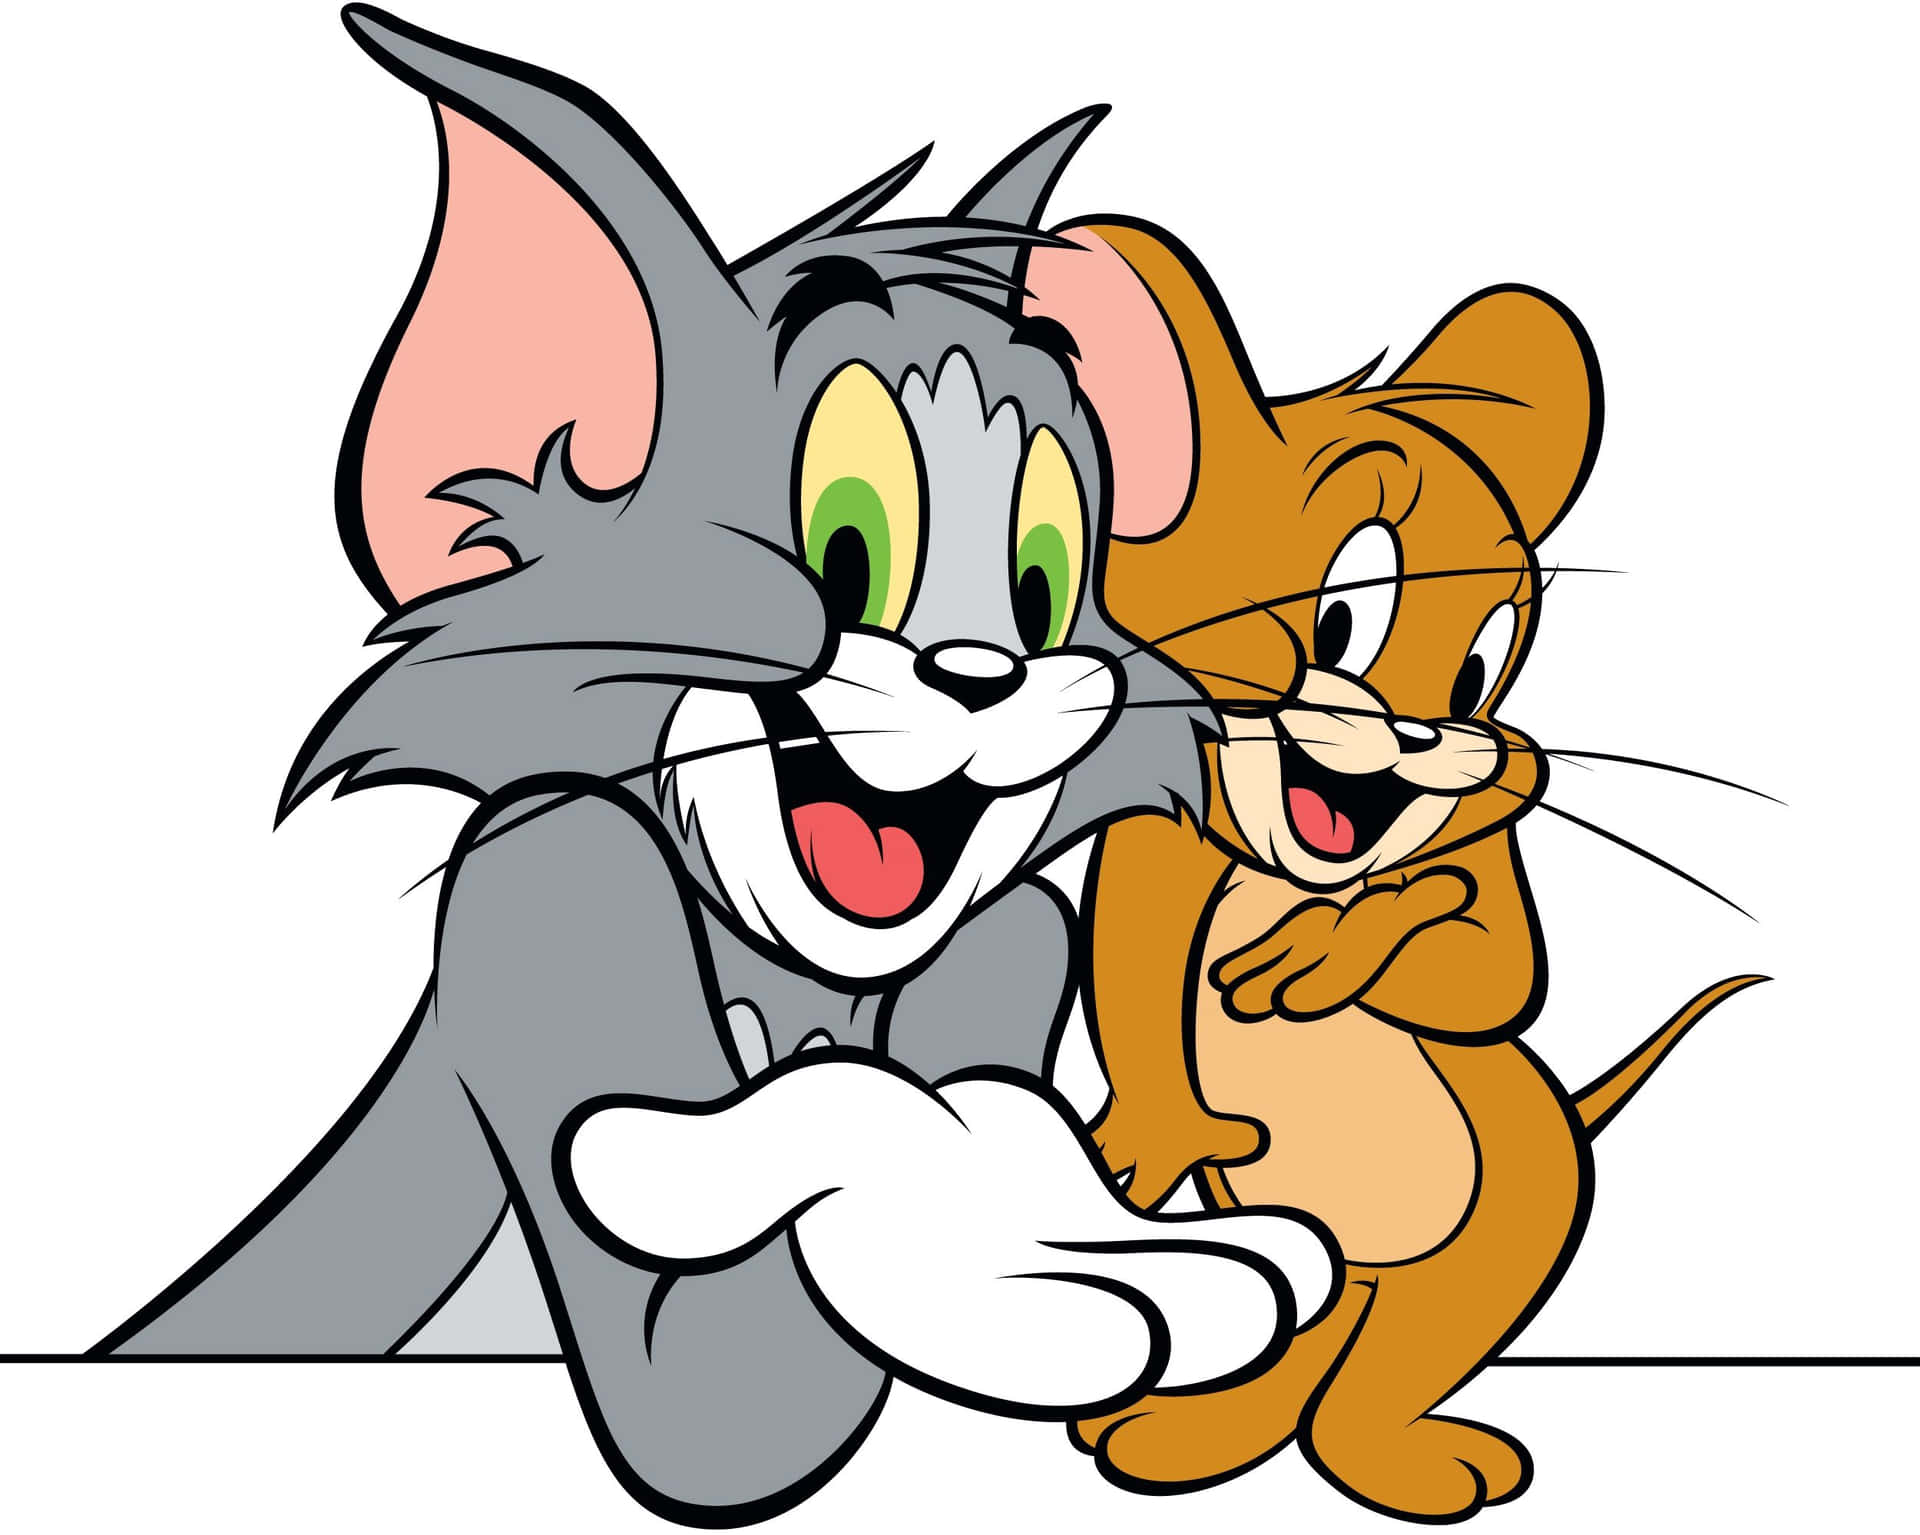 Tom and Jerry fighting it out on a sunny day Wallpaper